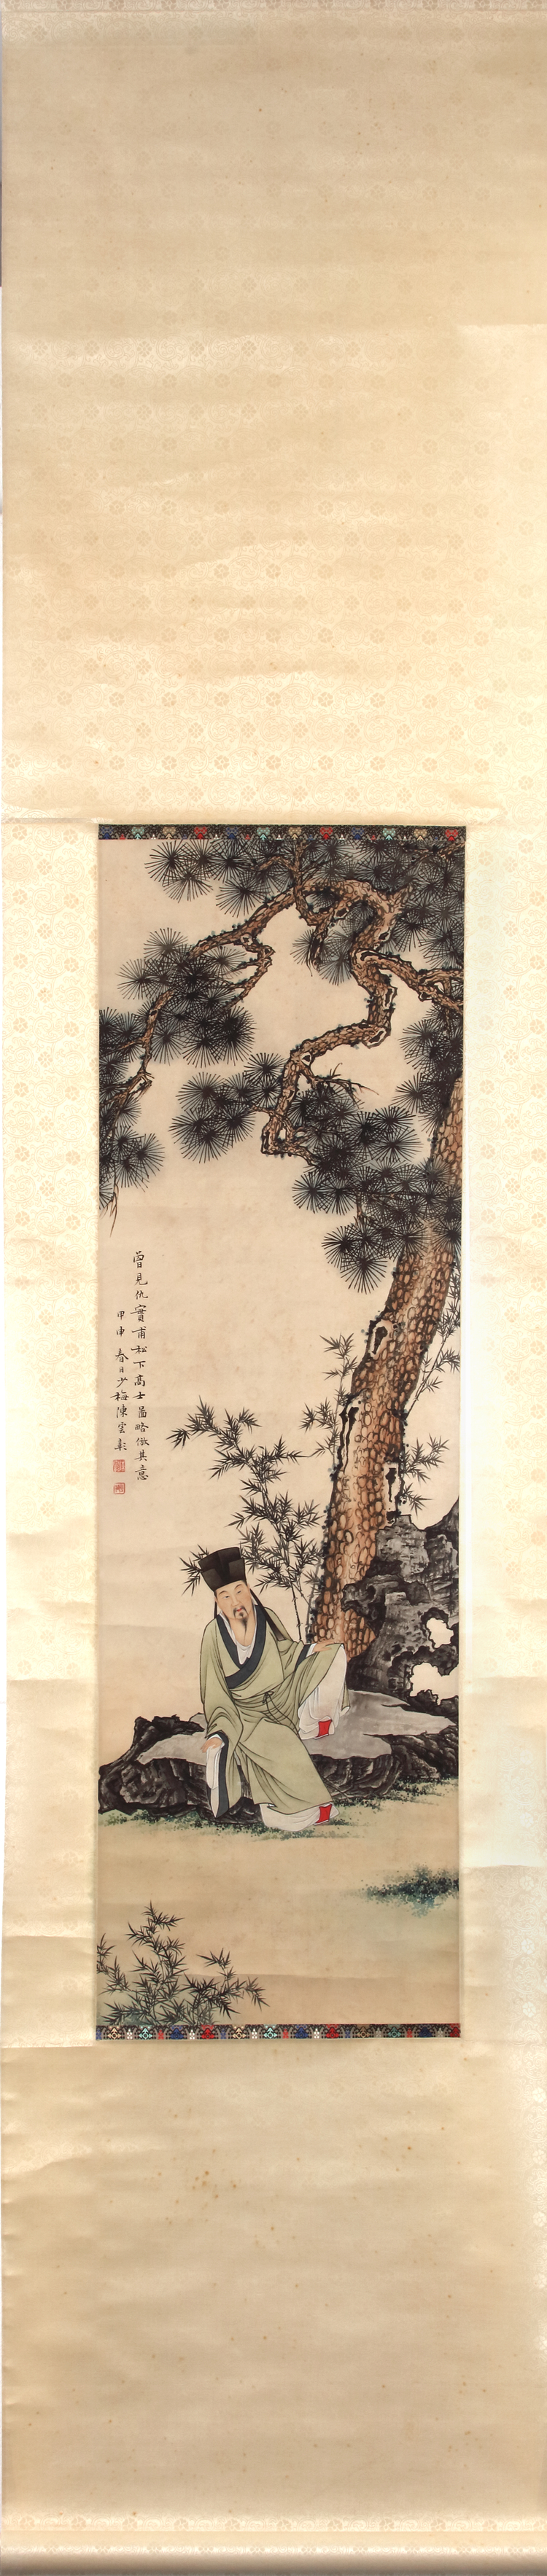 A CHINESE 'PINE AND SCHOLAR' HANGING SCROLL - CHEN YUNZHANG